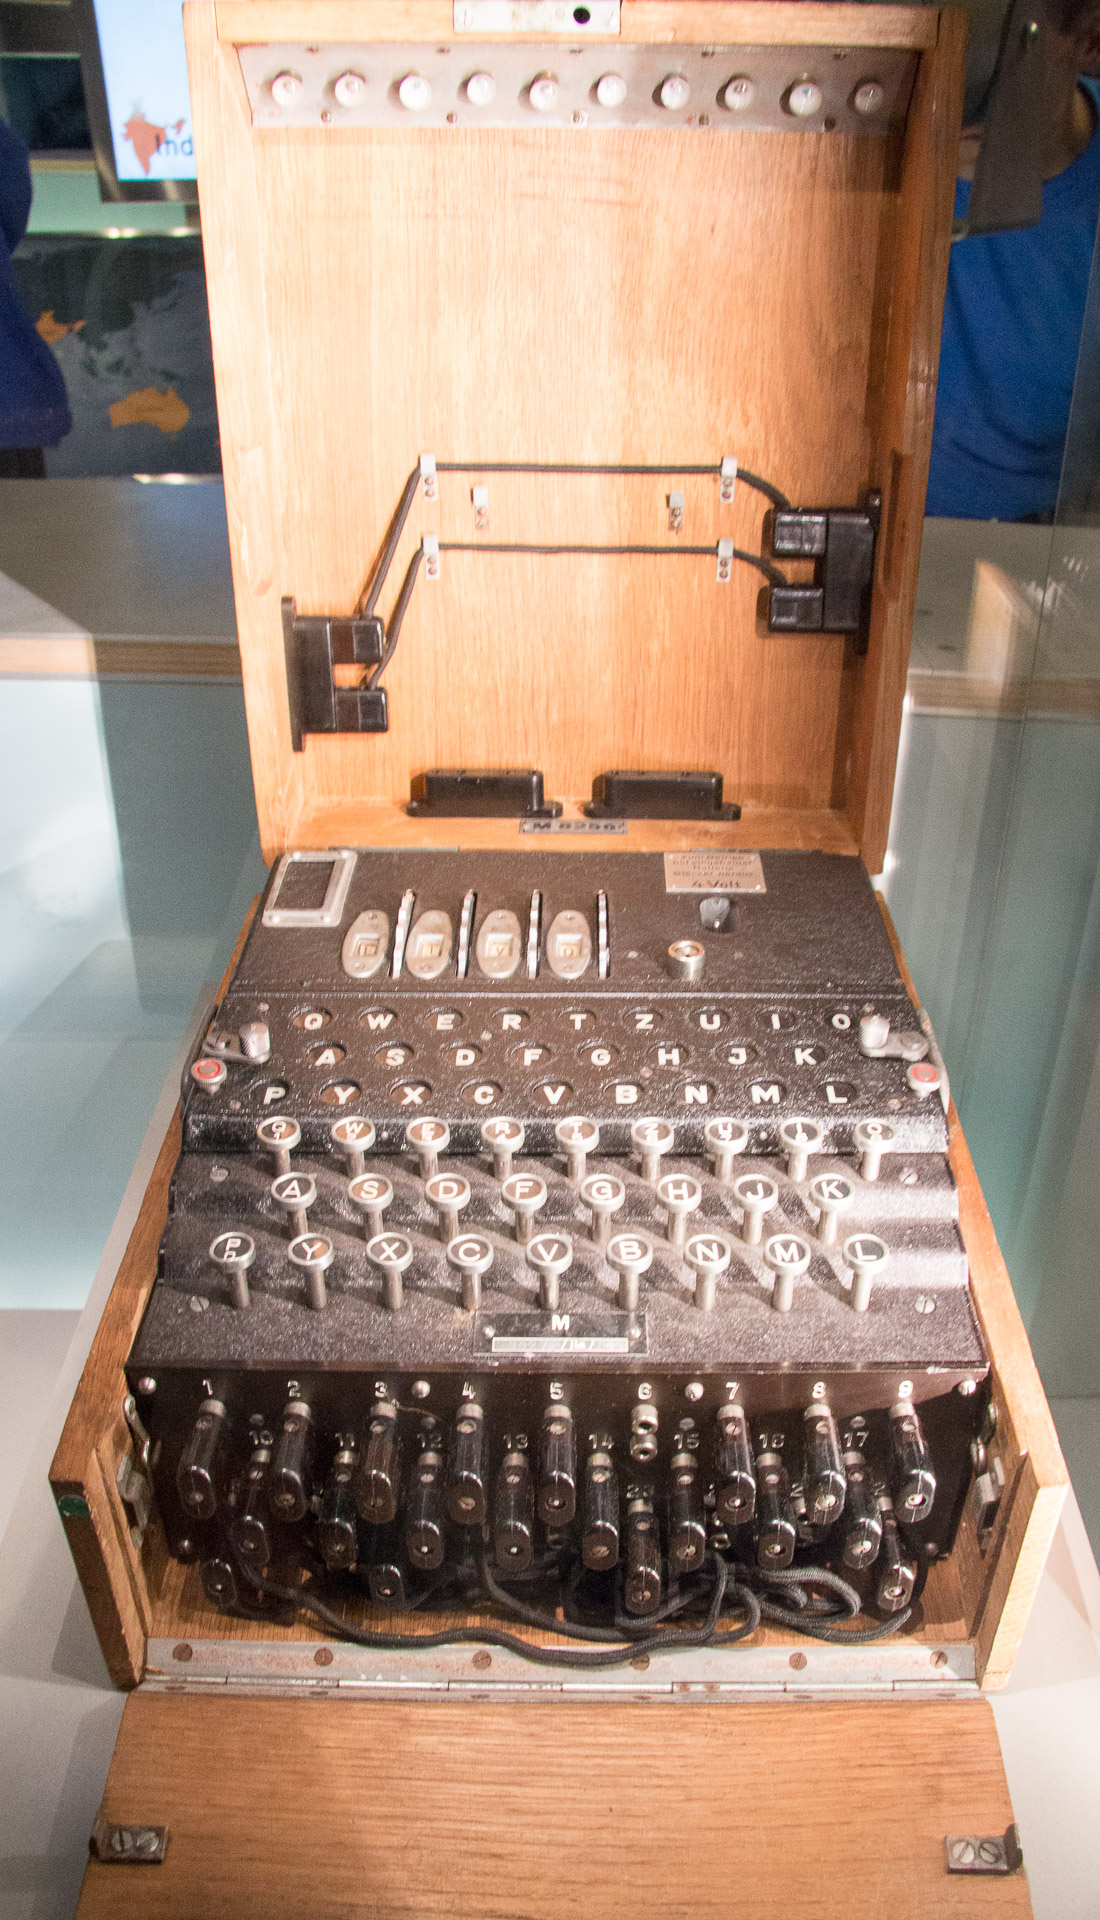 Enigma machine in the Churchill Museum at the Churchill War Rooms in London